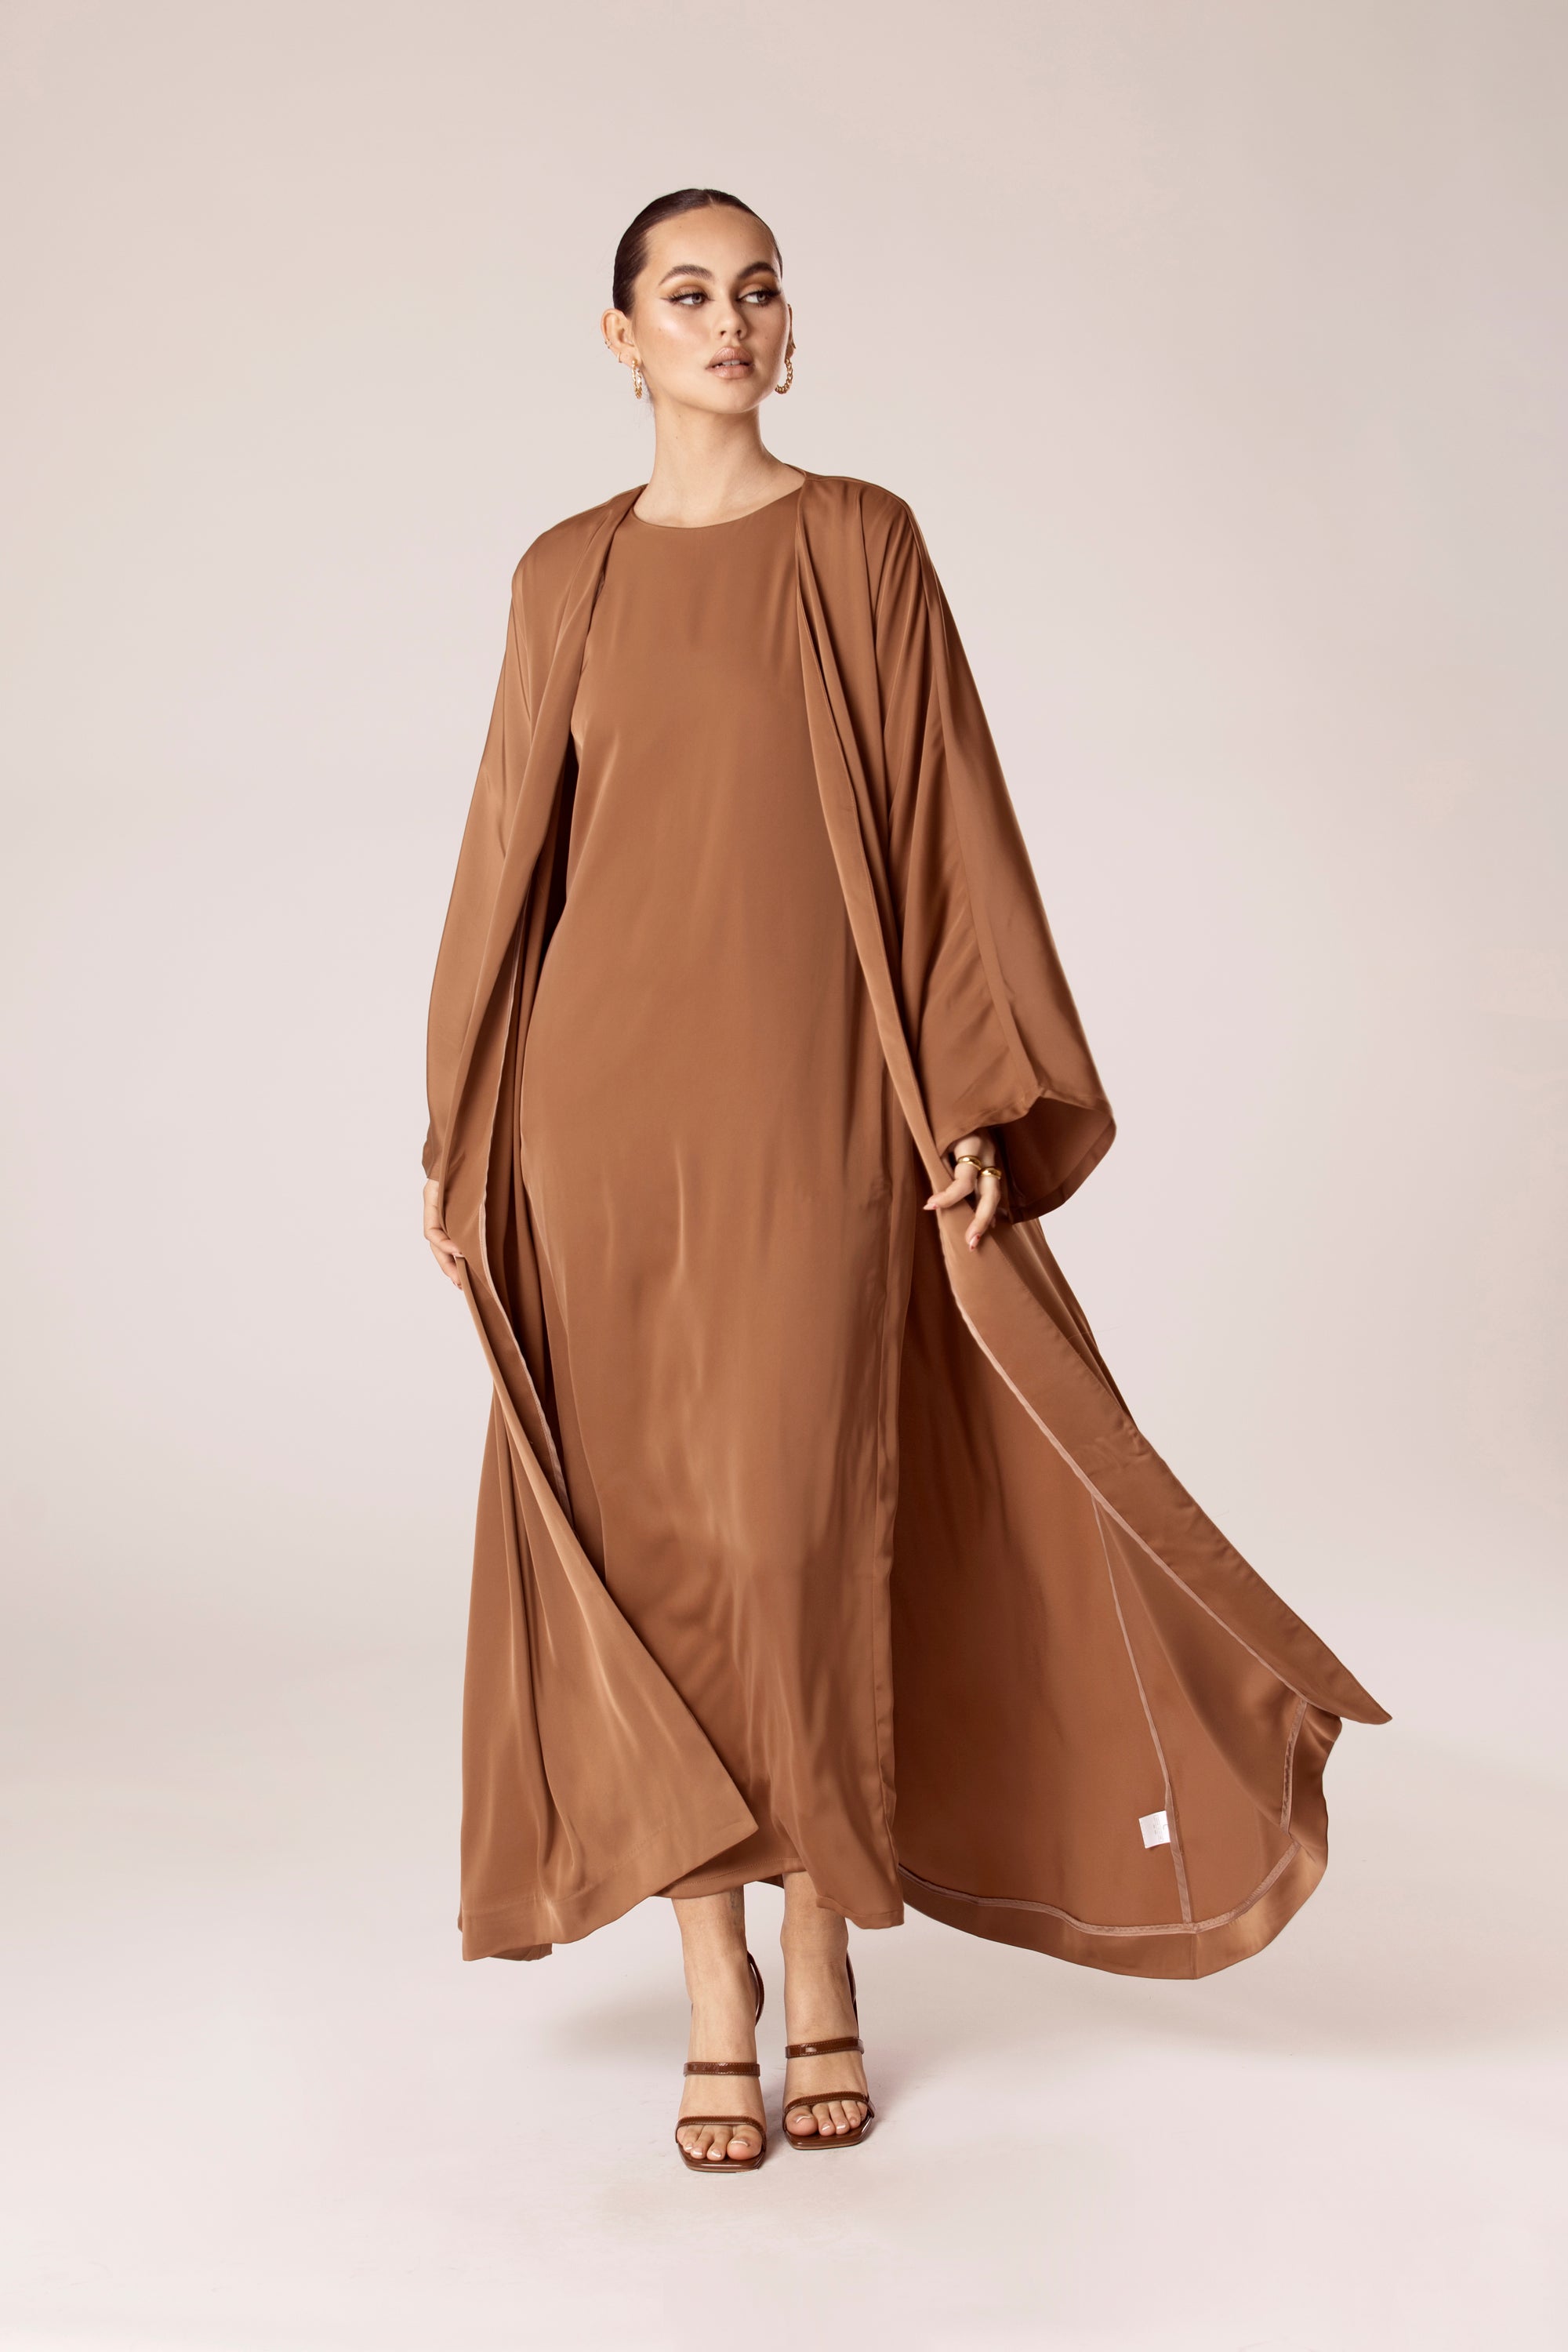 Angelina Open Abaya - Copper Veiled Collection 